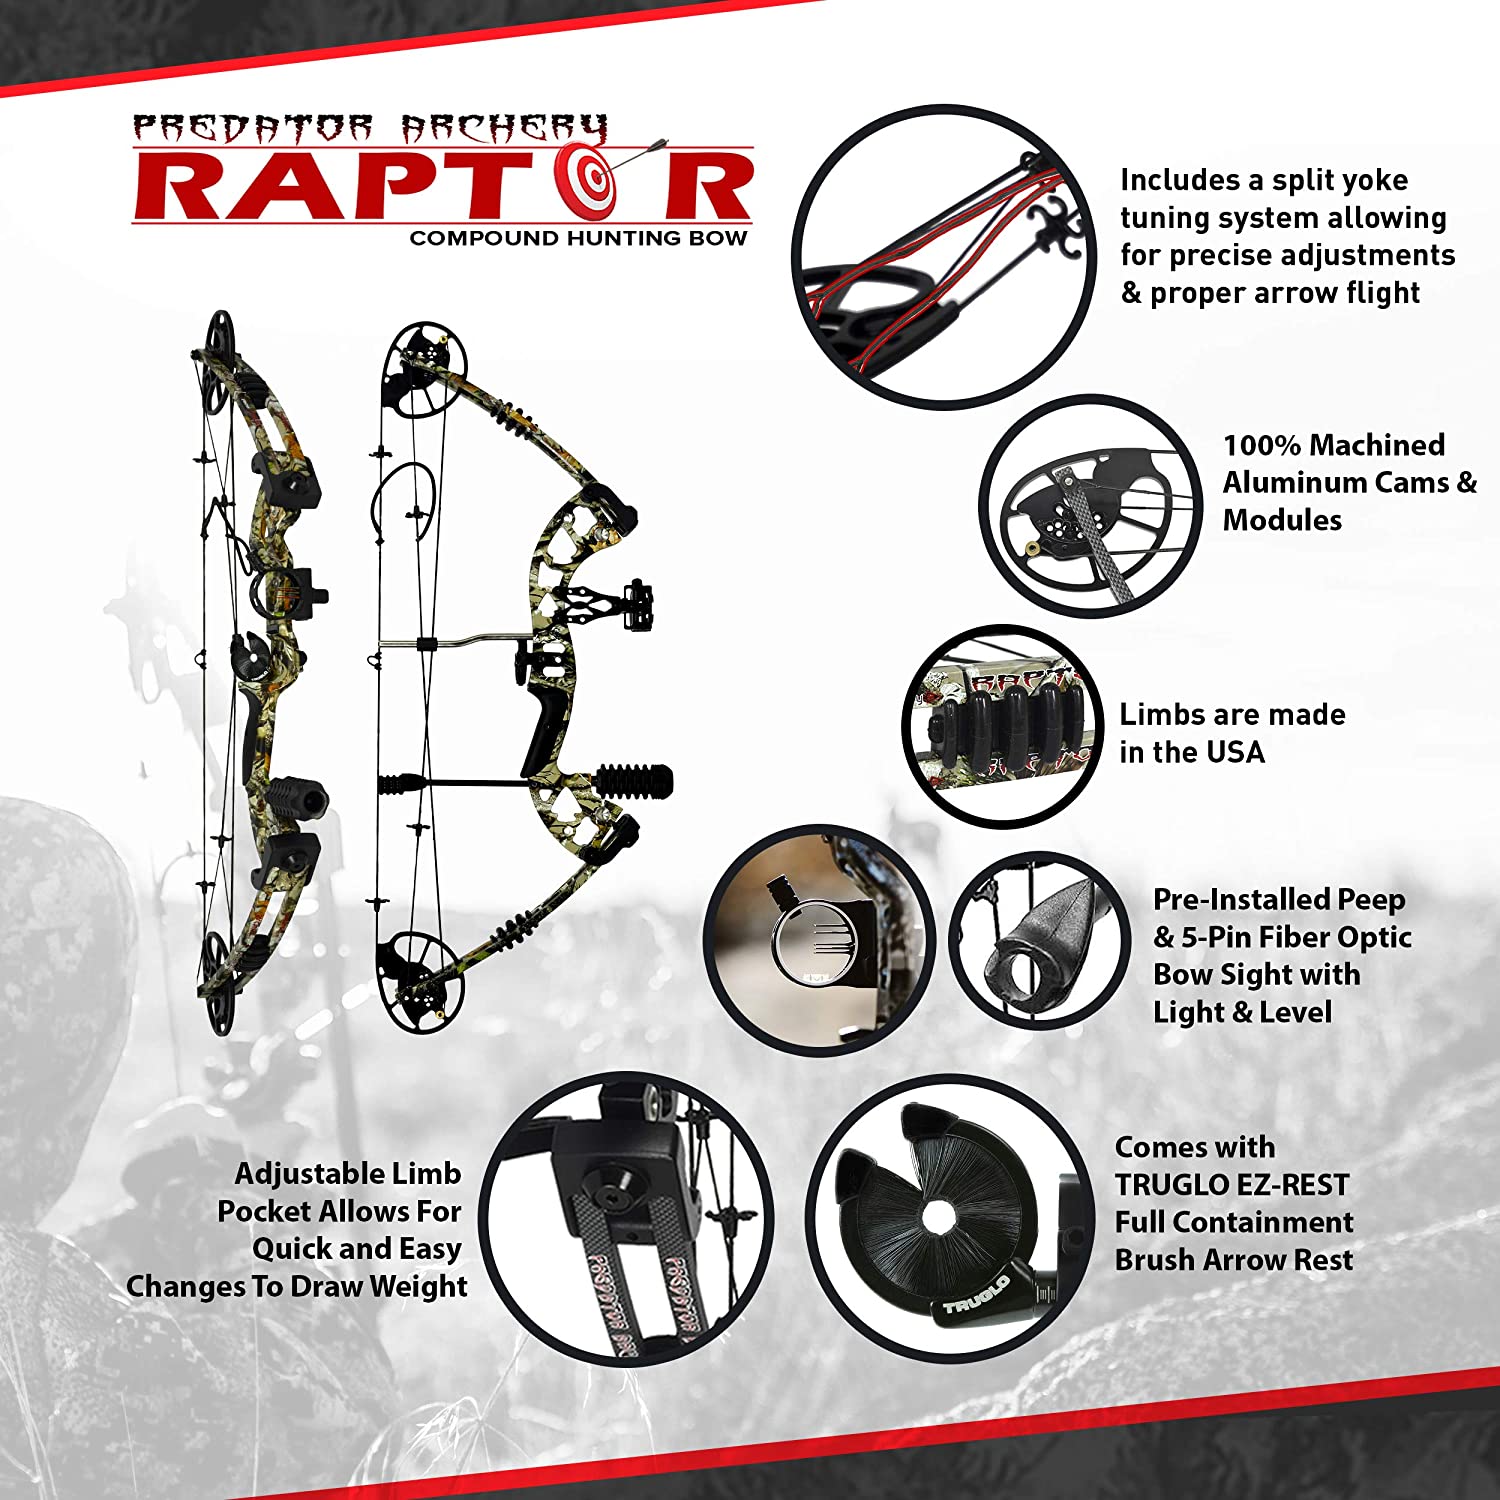 Raptor Compound Hunting Bow Kit review